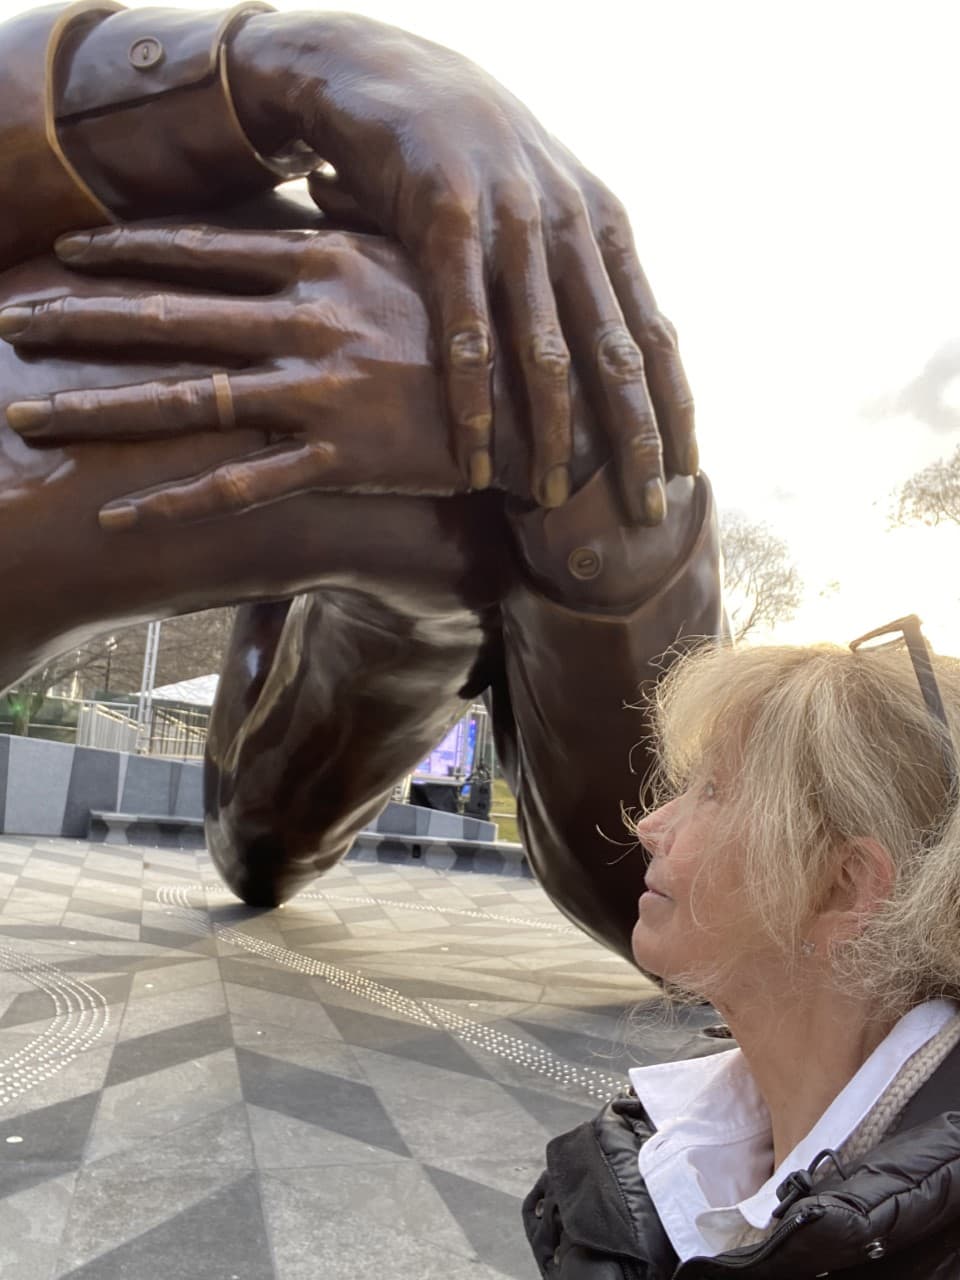 Host Robin Young looks at &quot;The Embrace&quot; where the hands appear to form a heart. (Robin Young/Here &amp; Now)